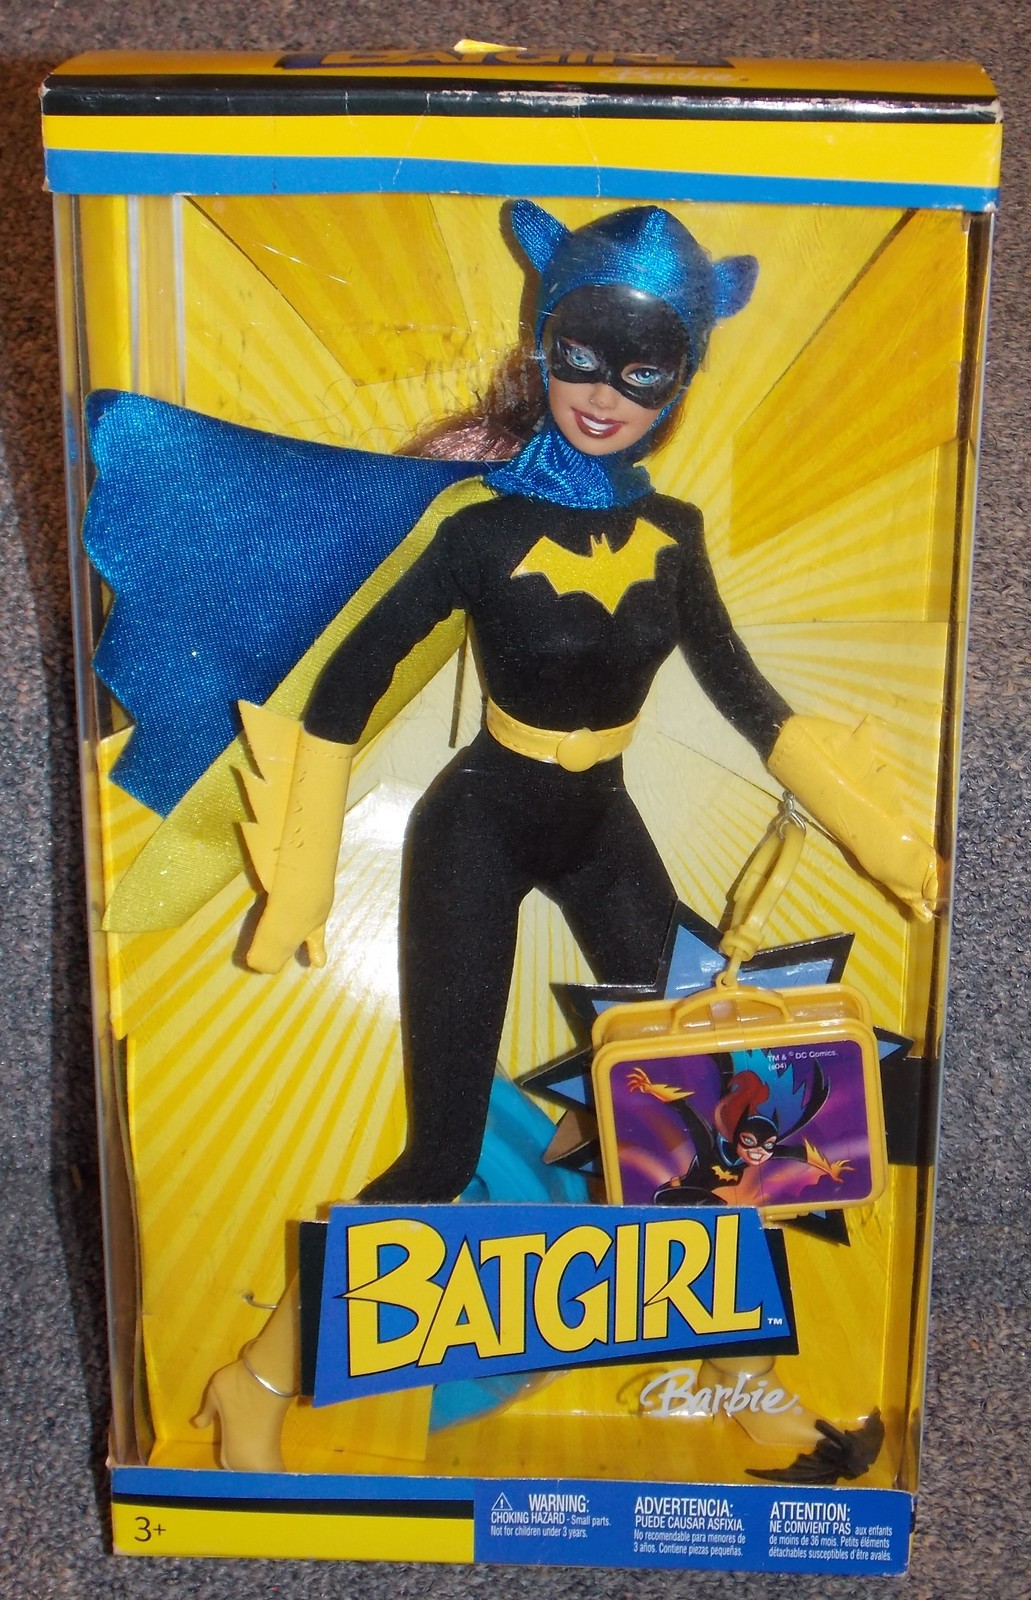 Primary image for 2004 DC Comics Batgirl Barbie Doll Figure New In The Box